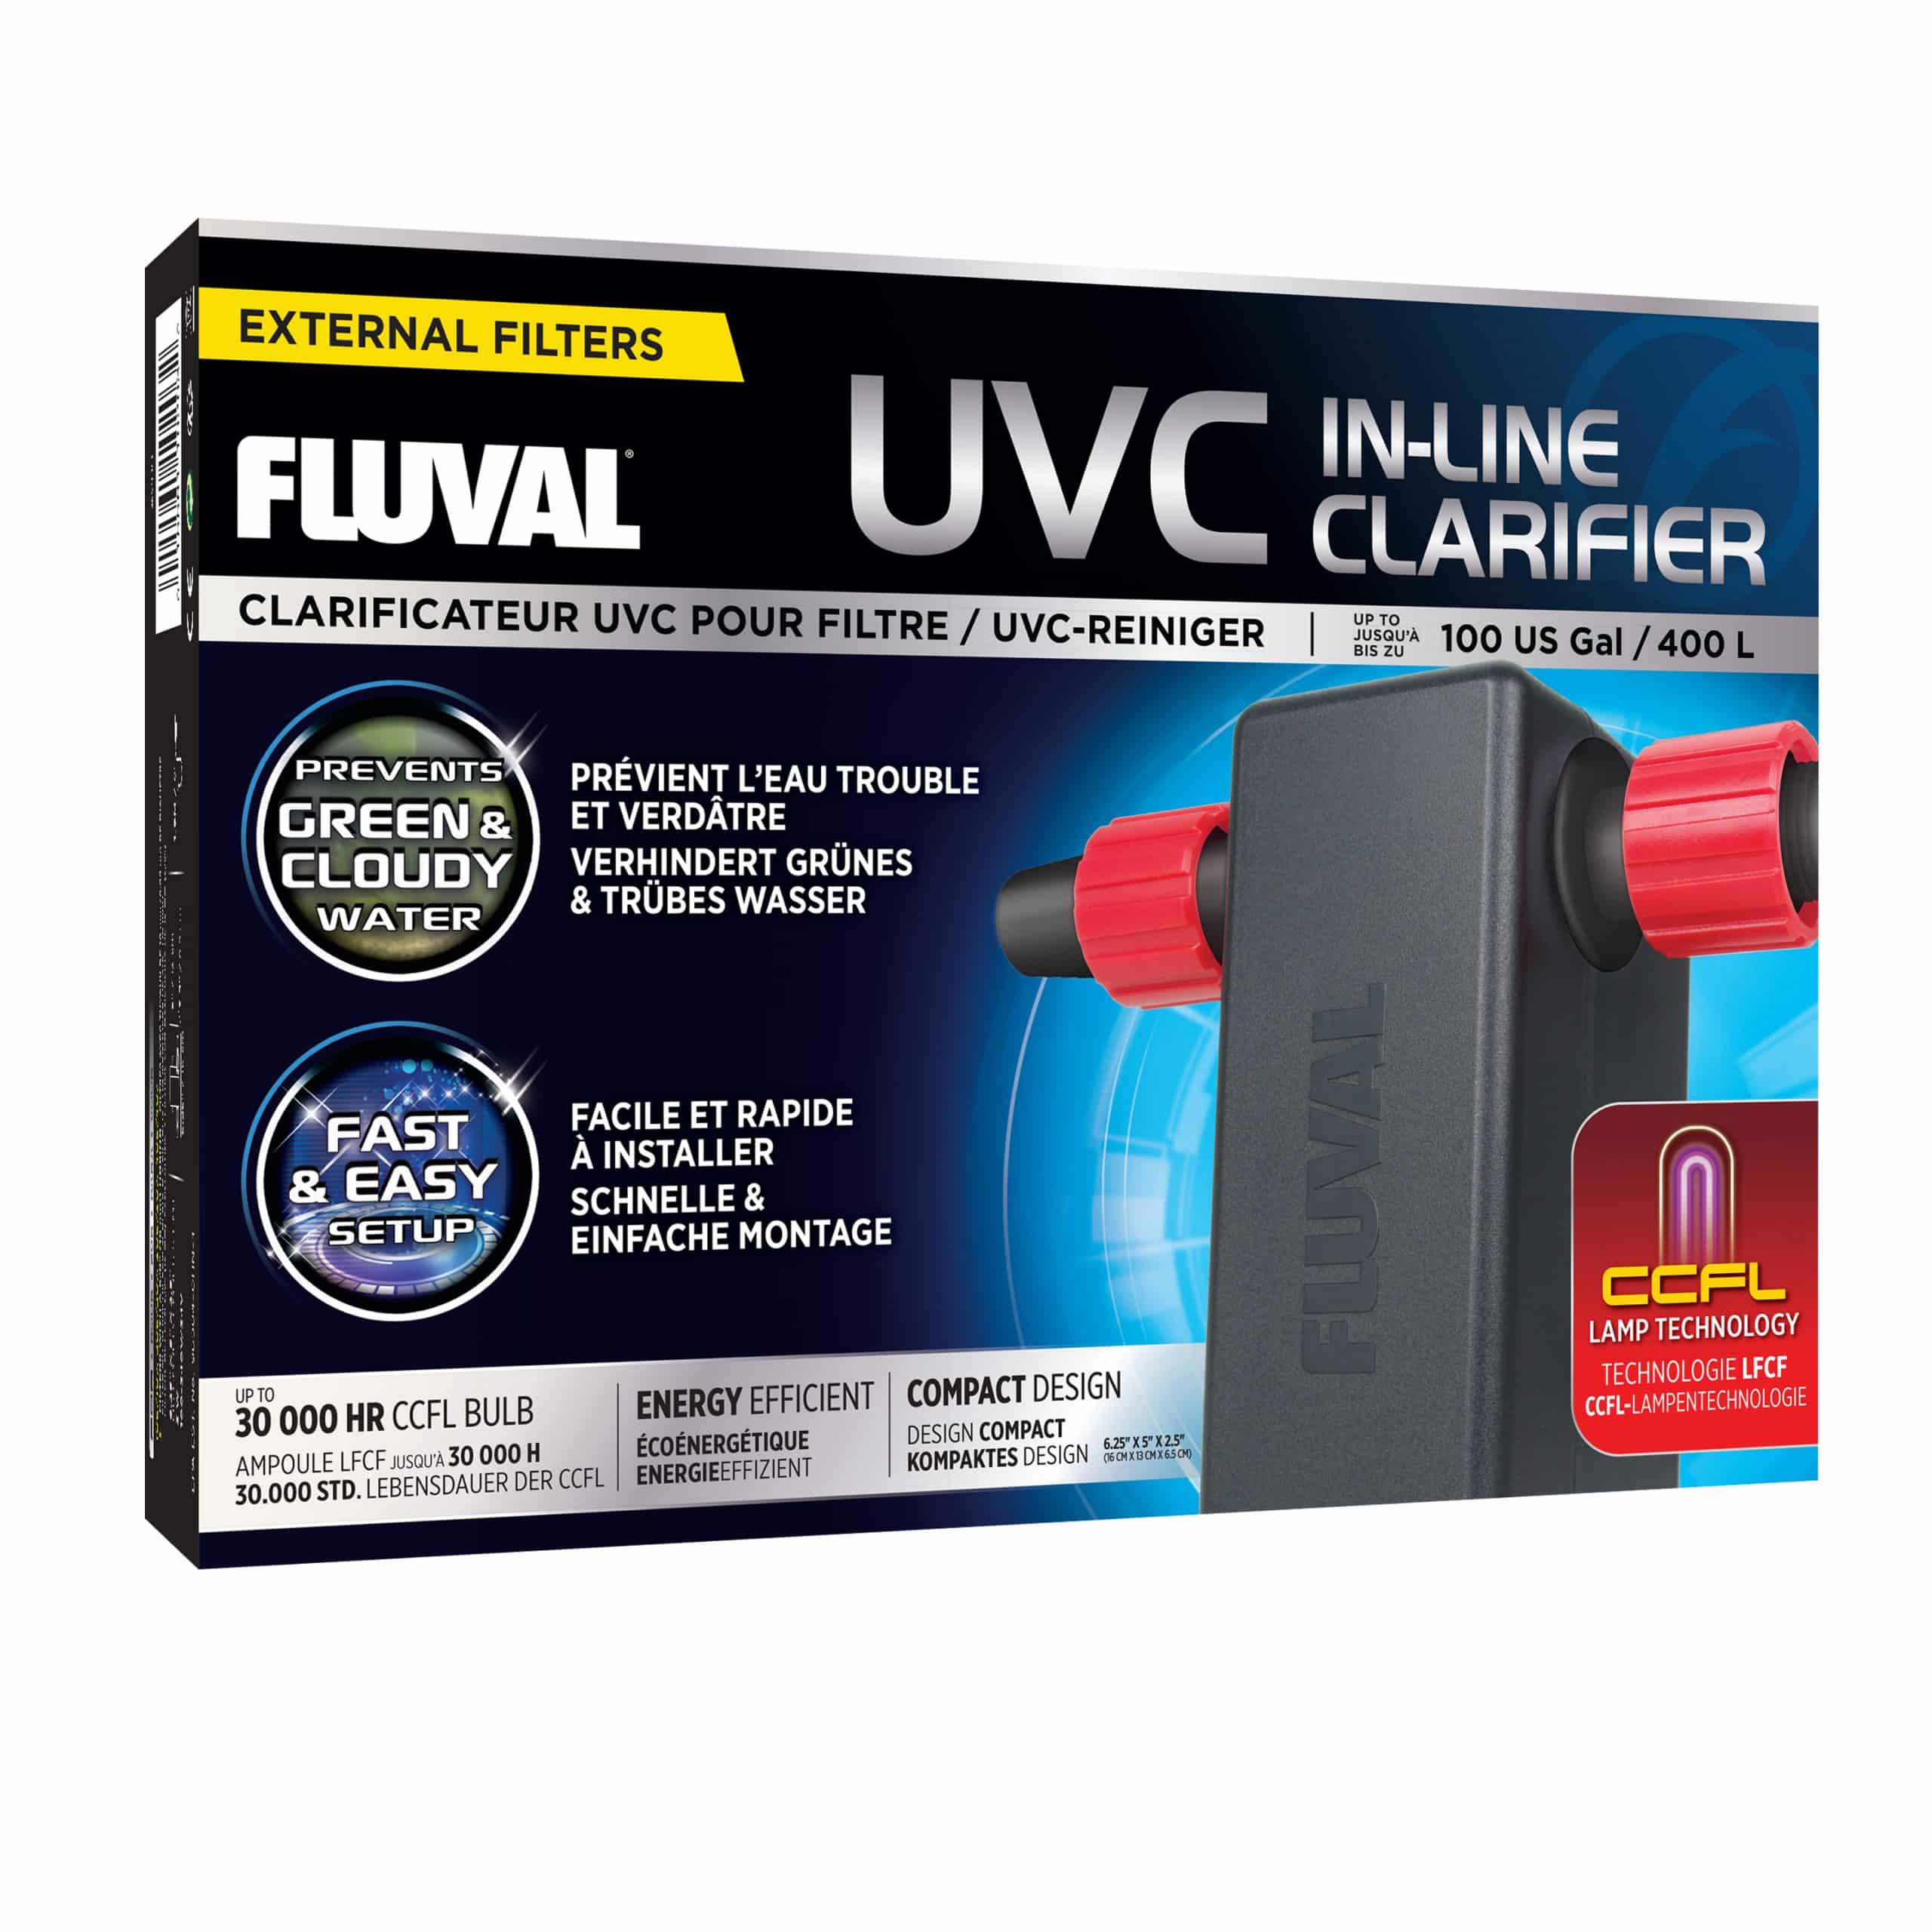 Fluval UVC In-Line Clarifier eliminates suspended bacteria and algae for a clear and healthy aquarium. It quickly and easily connects to most canister filters.